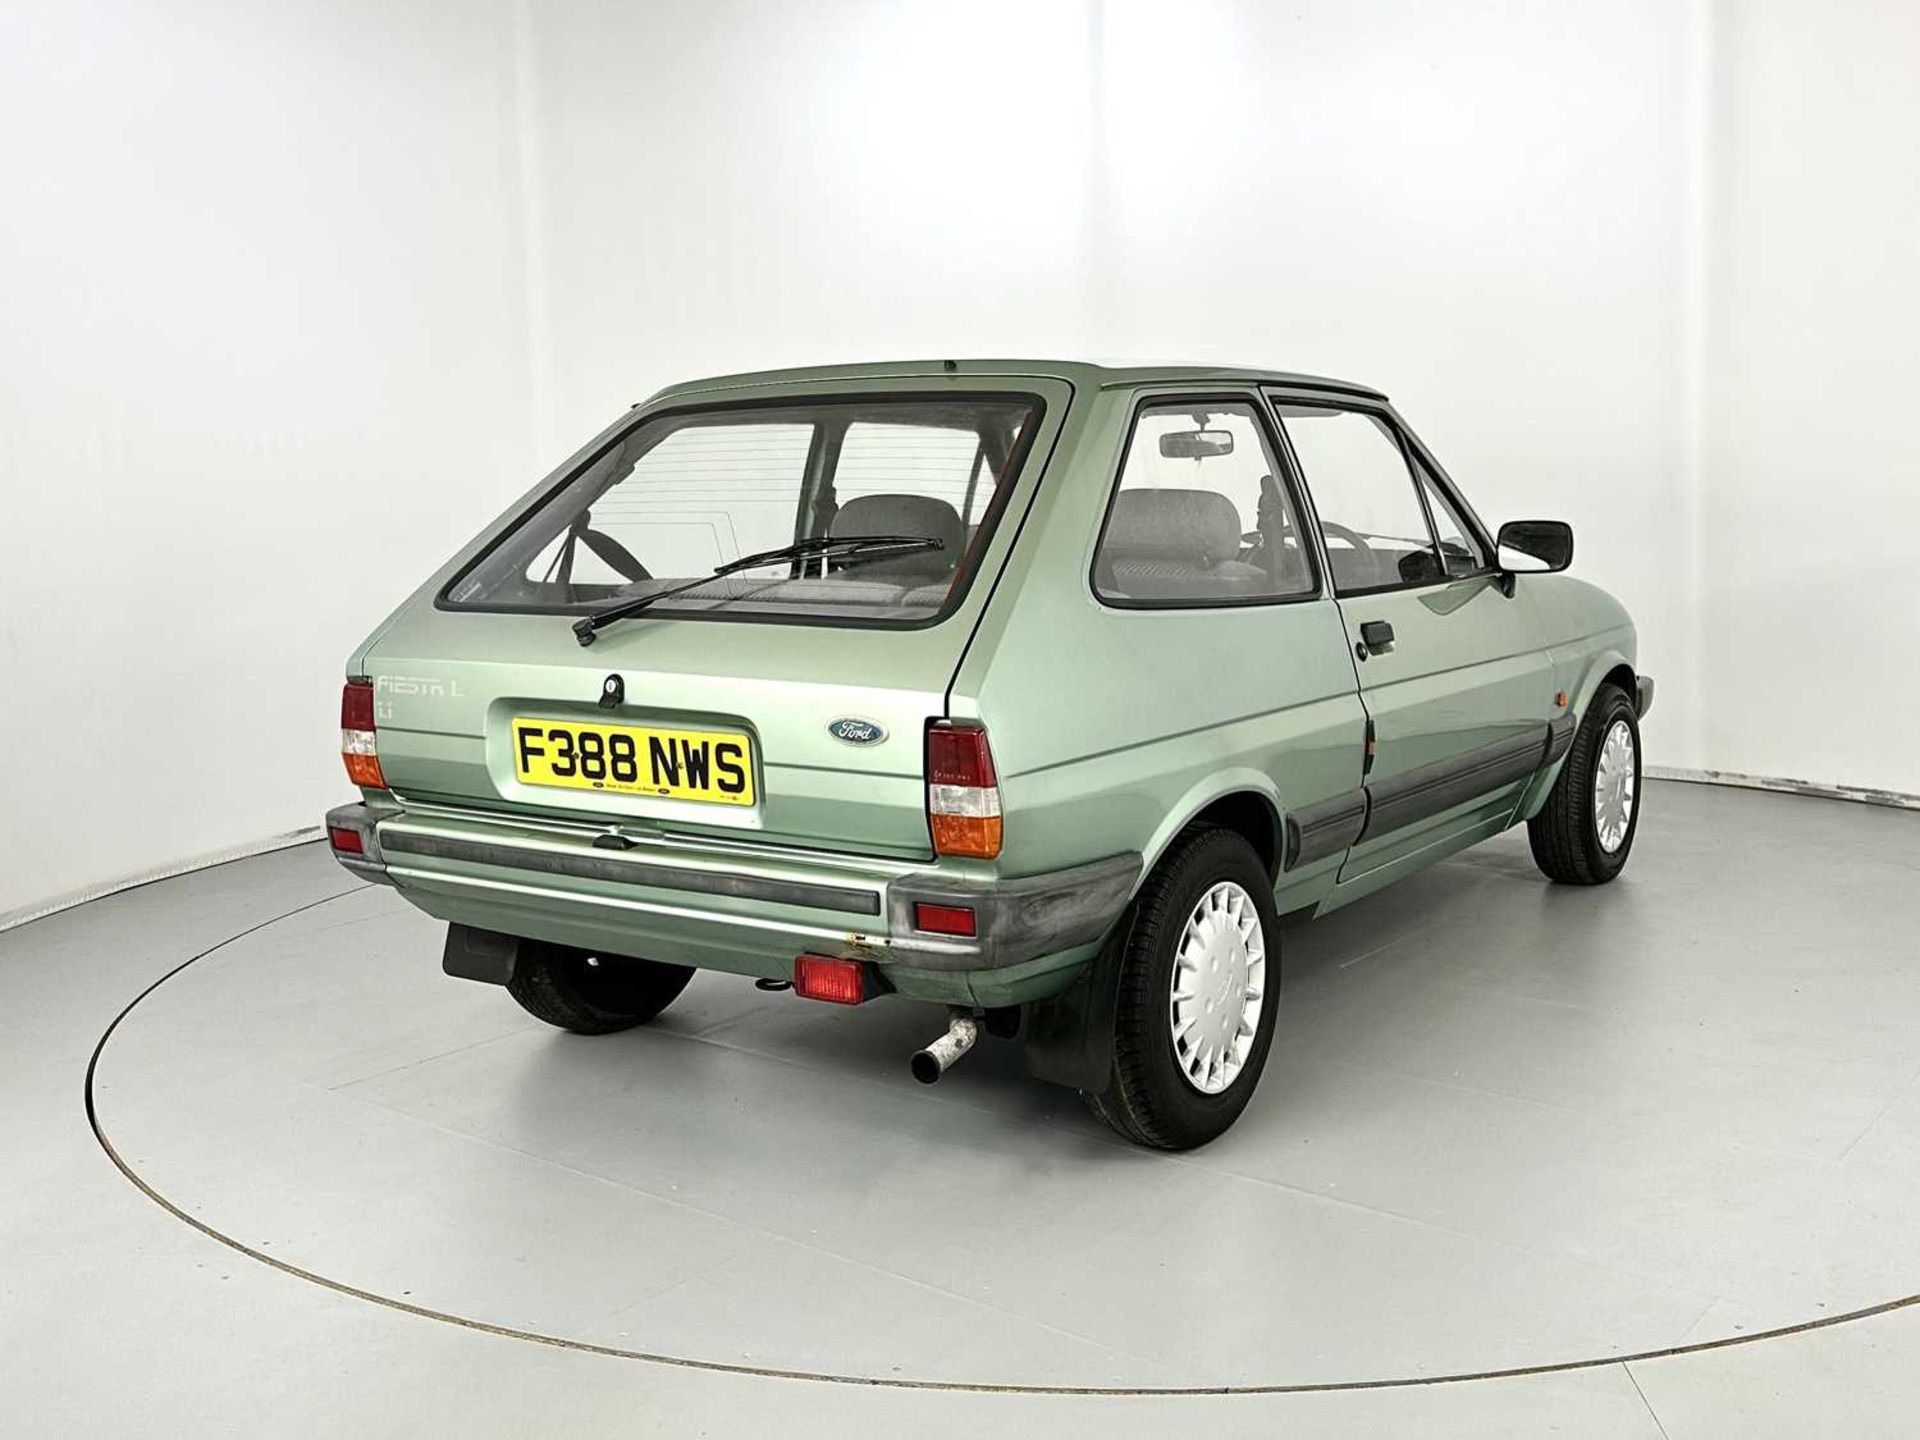 1988 Ford Fiesta - Image 9 of 30